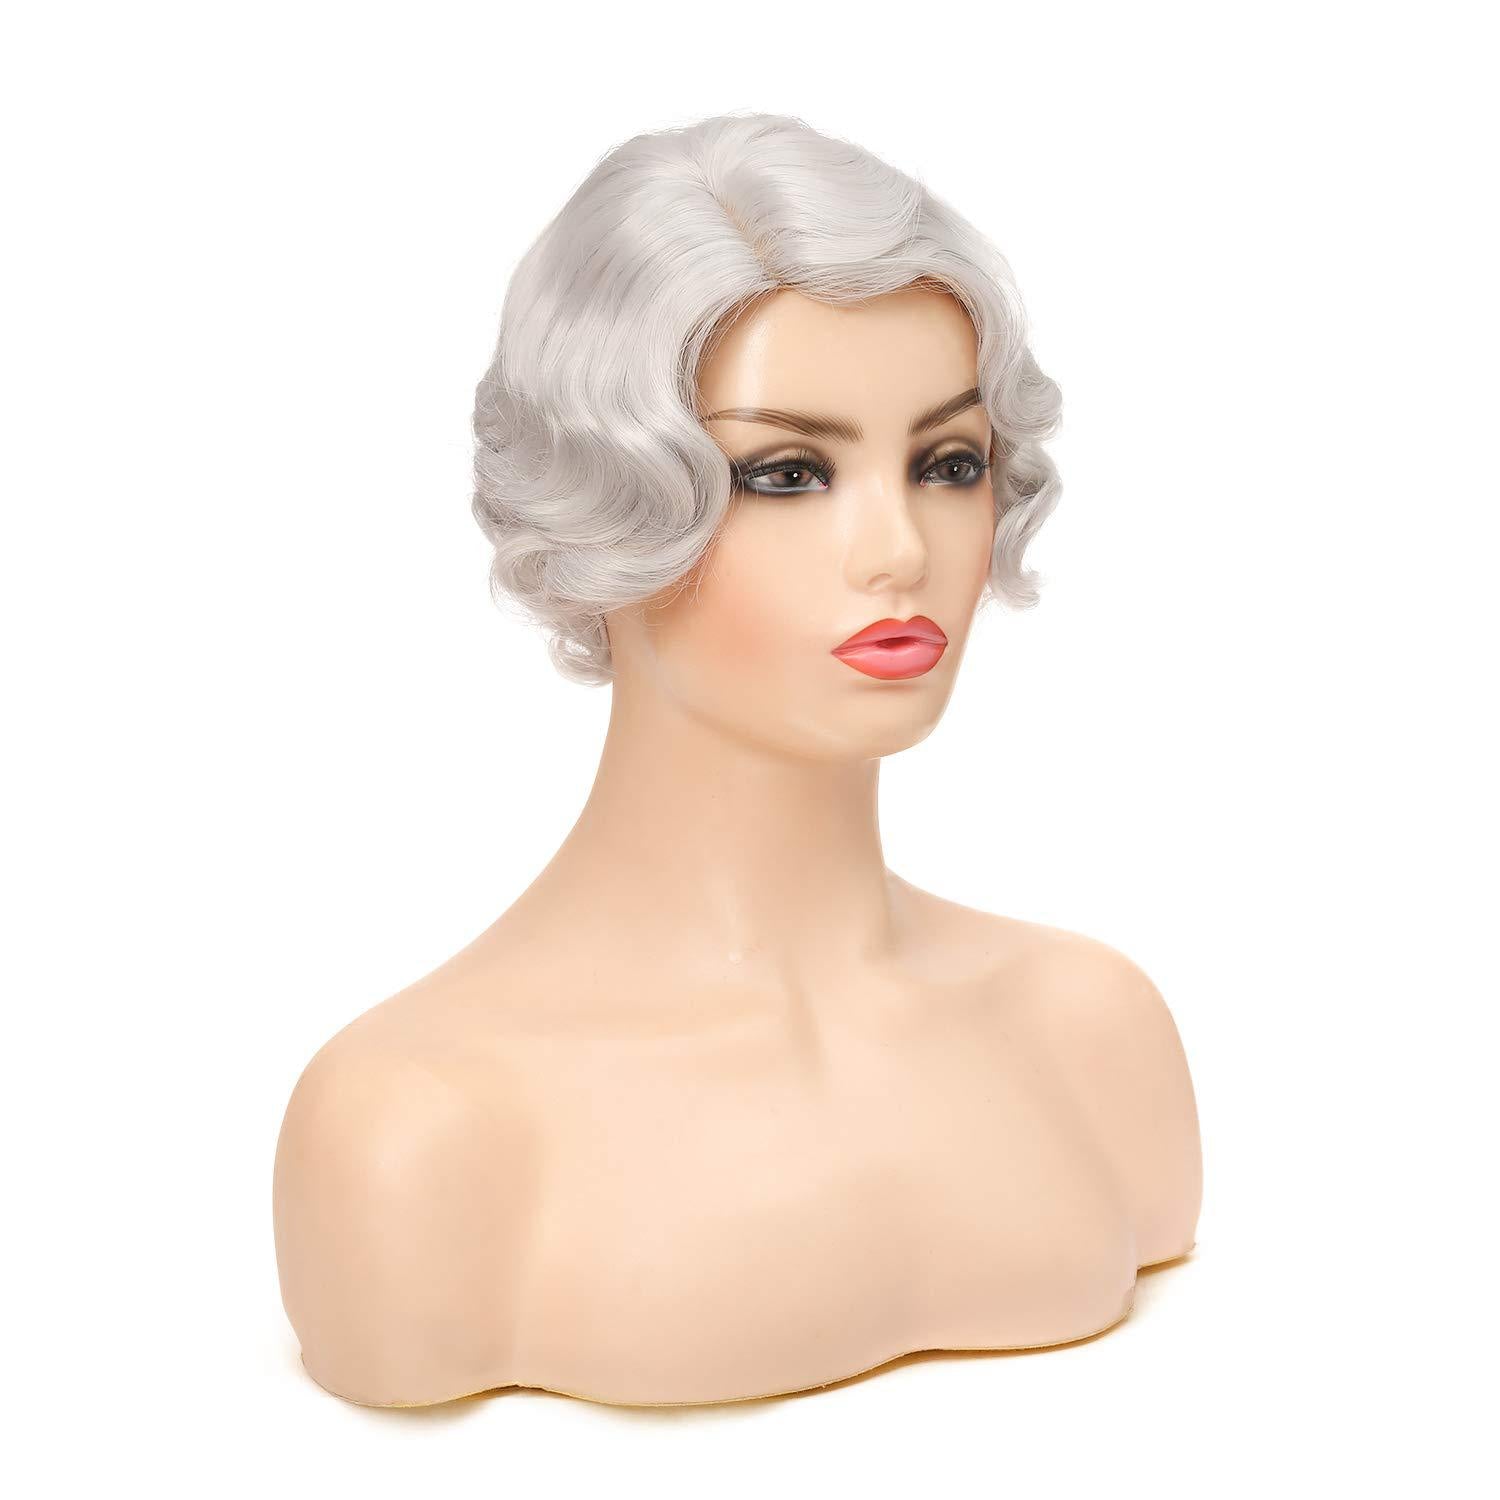 Middle point retro short curly wave head short wave classical water wave pattern wig head set